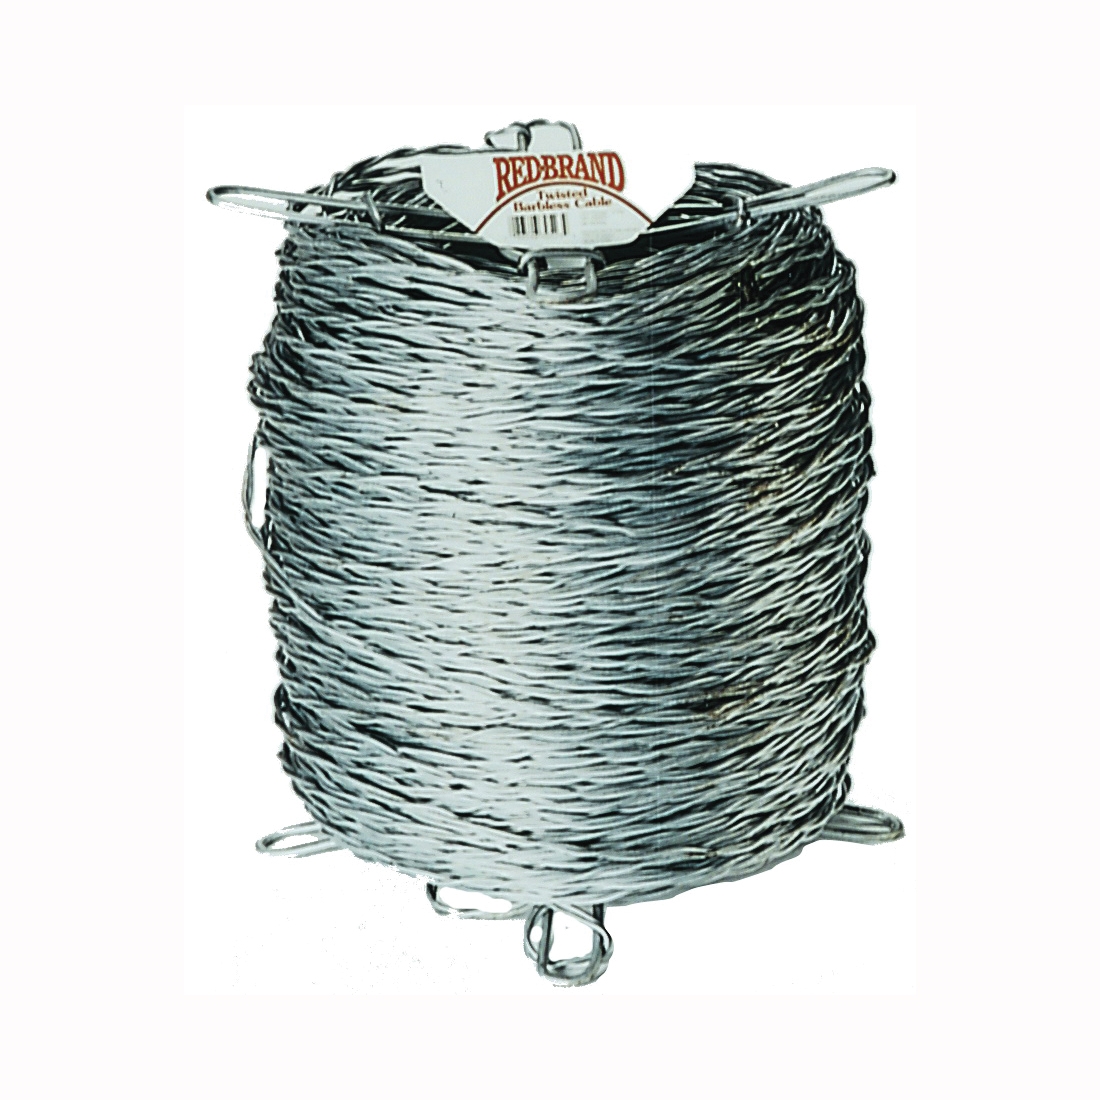 70523 Barbless Cable, 1320 ft L, 12.5 ga Gauge, Galvanized Steel